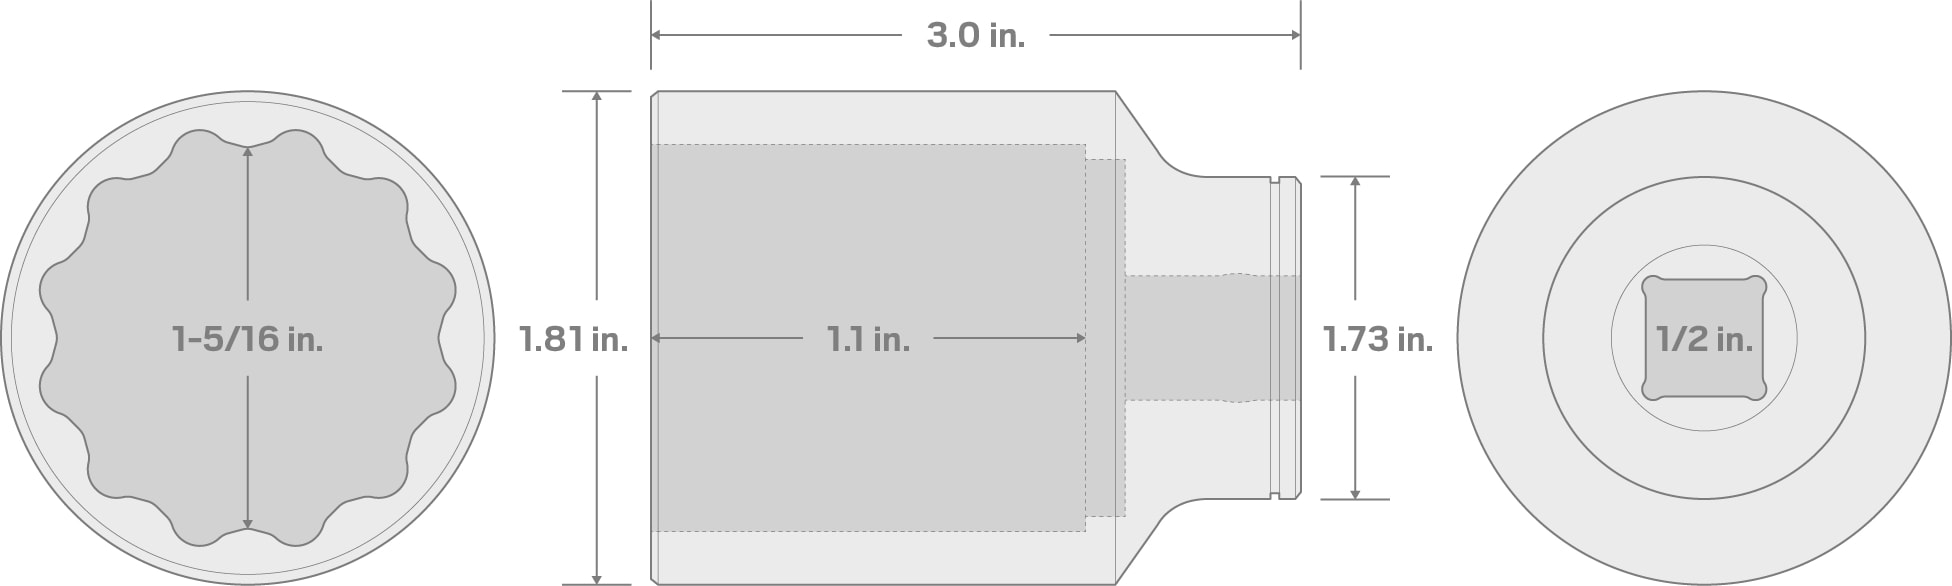 Specs for 1/2 Inch Drive x 1-5/16 Inch Deep 12-Point Socket